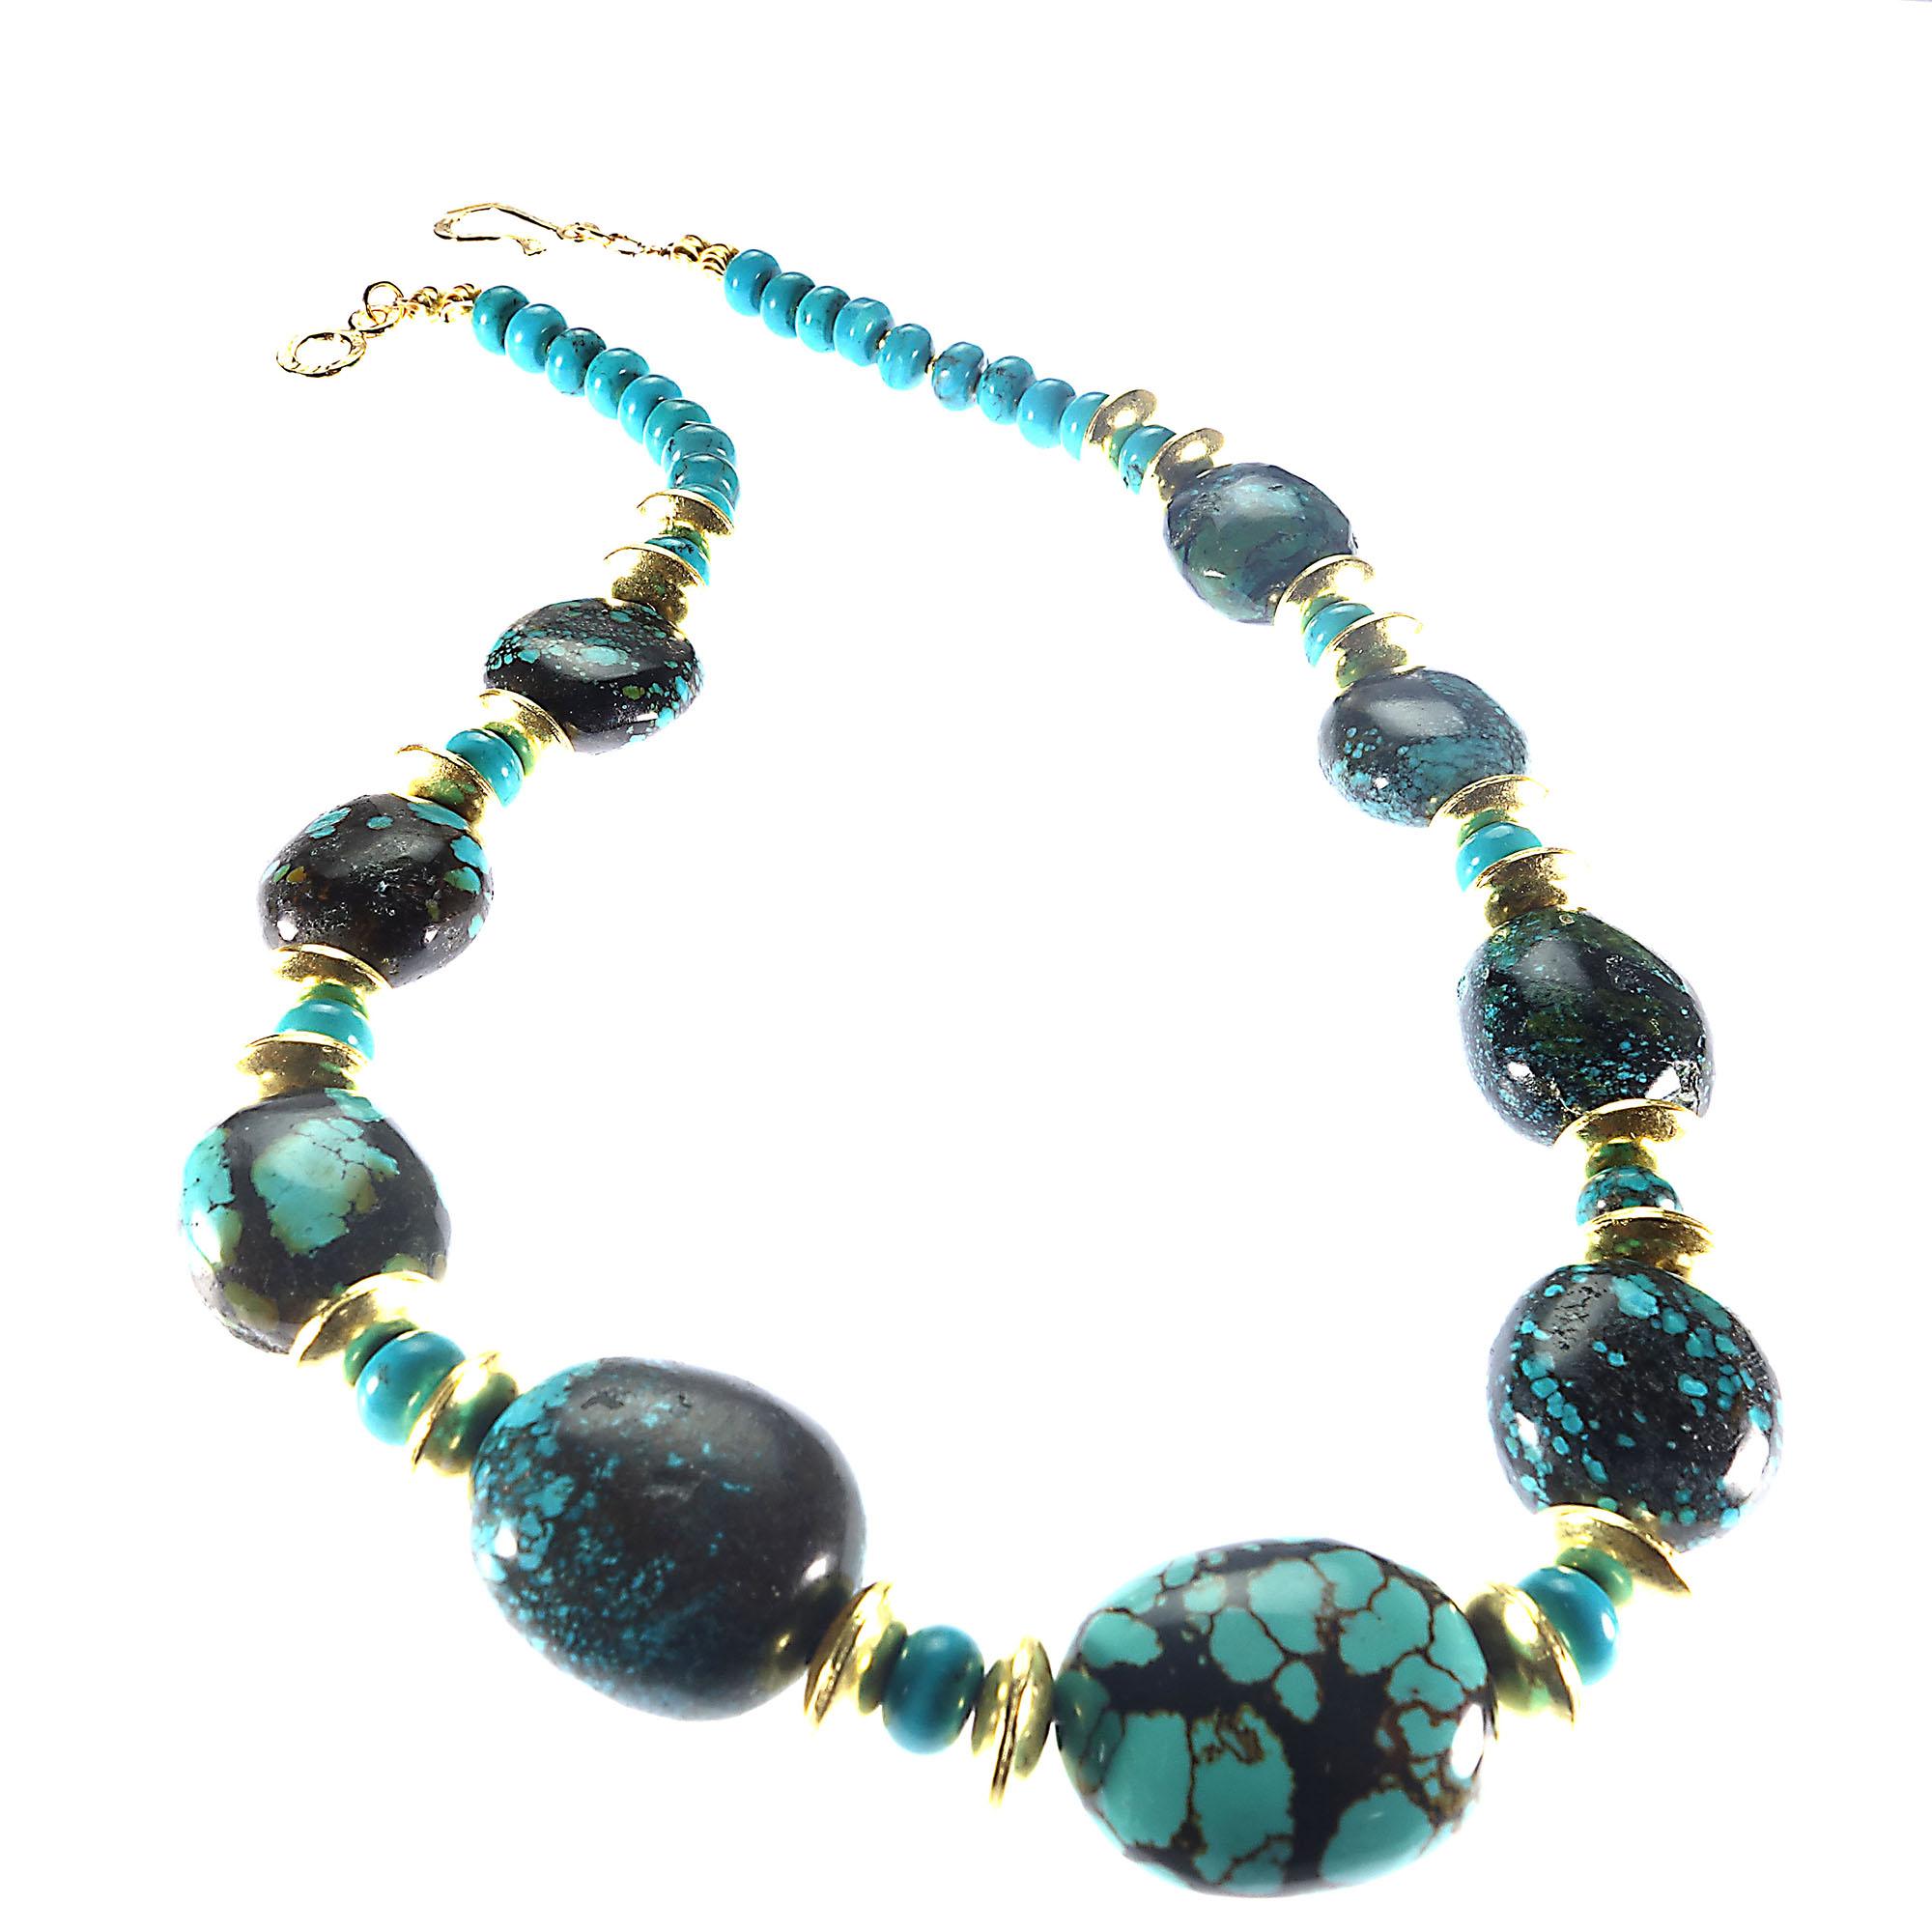 Bead AJD Stunning Hubei Turquoise Necklace with Gold Accents